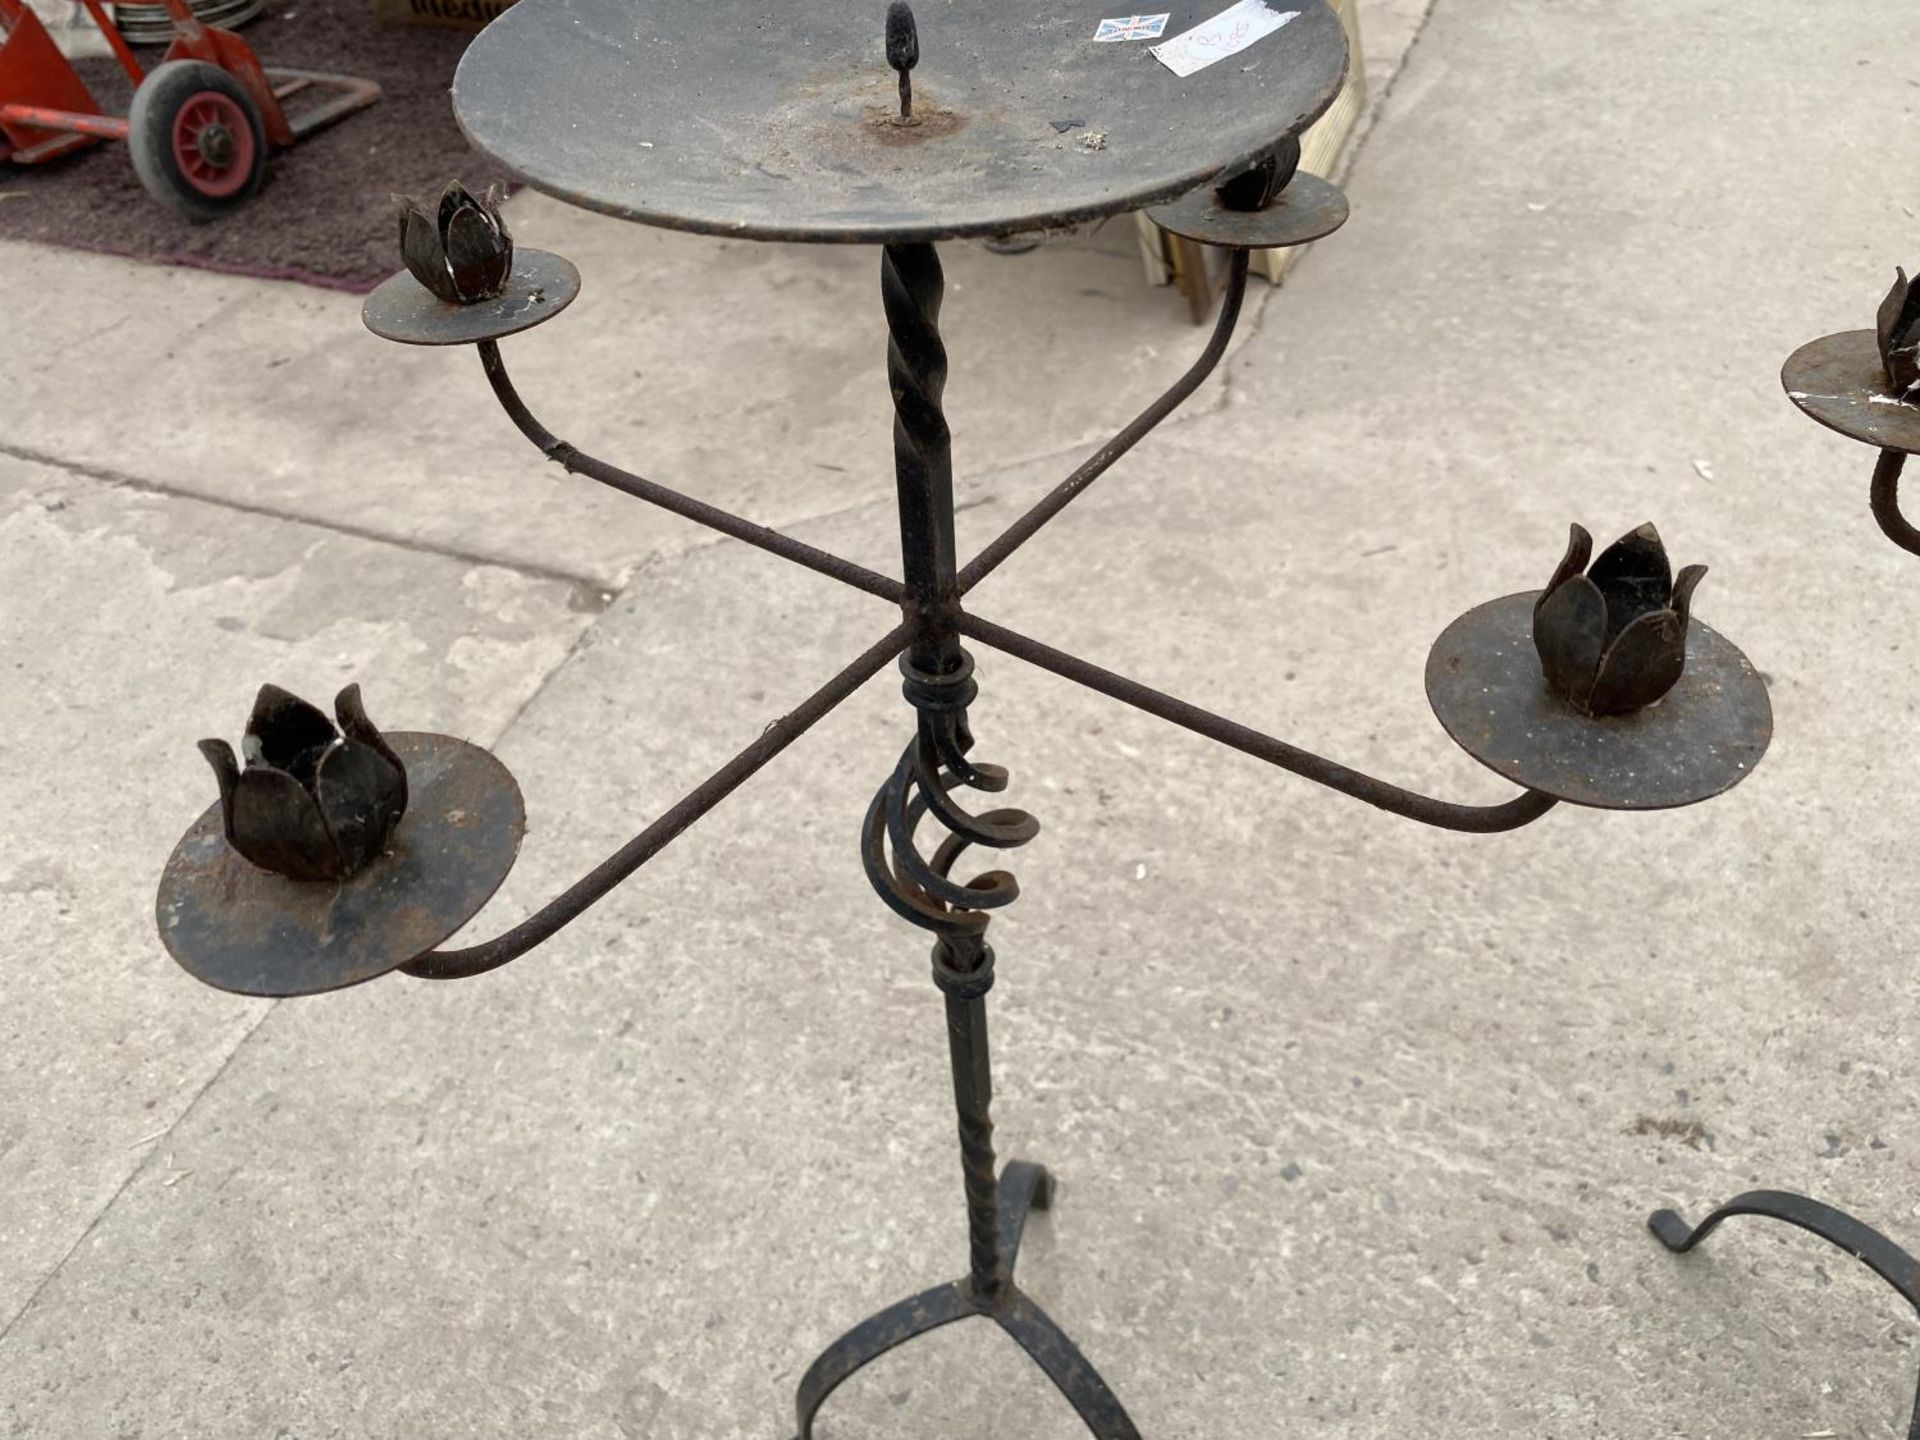 A PAIR OF DECORATIVE WROUGHT IRON CANDLE HOLDERS - Image 8 of 10